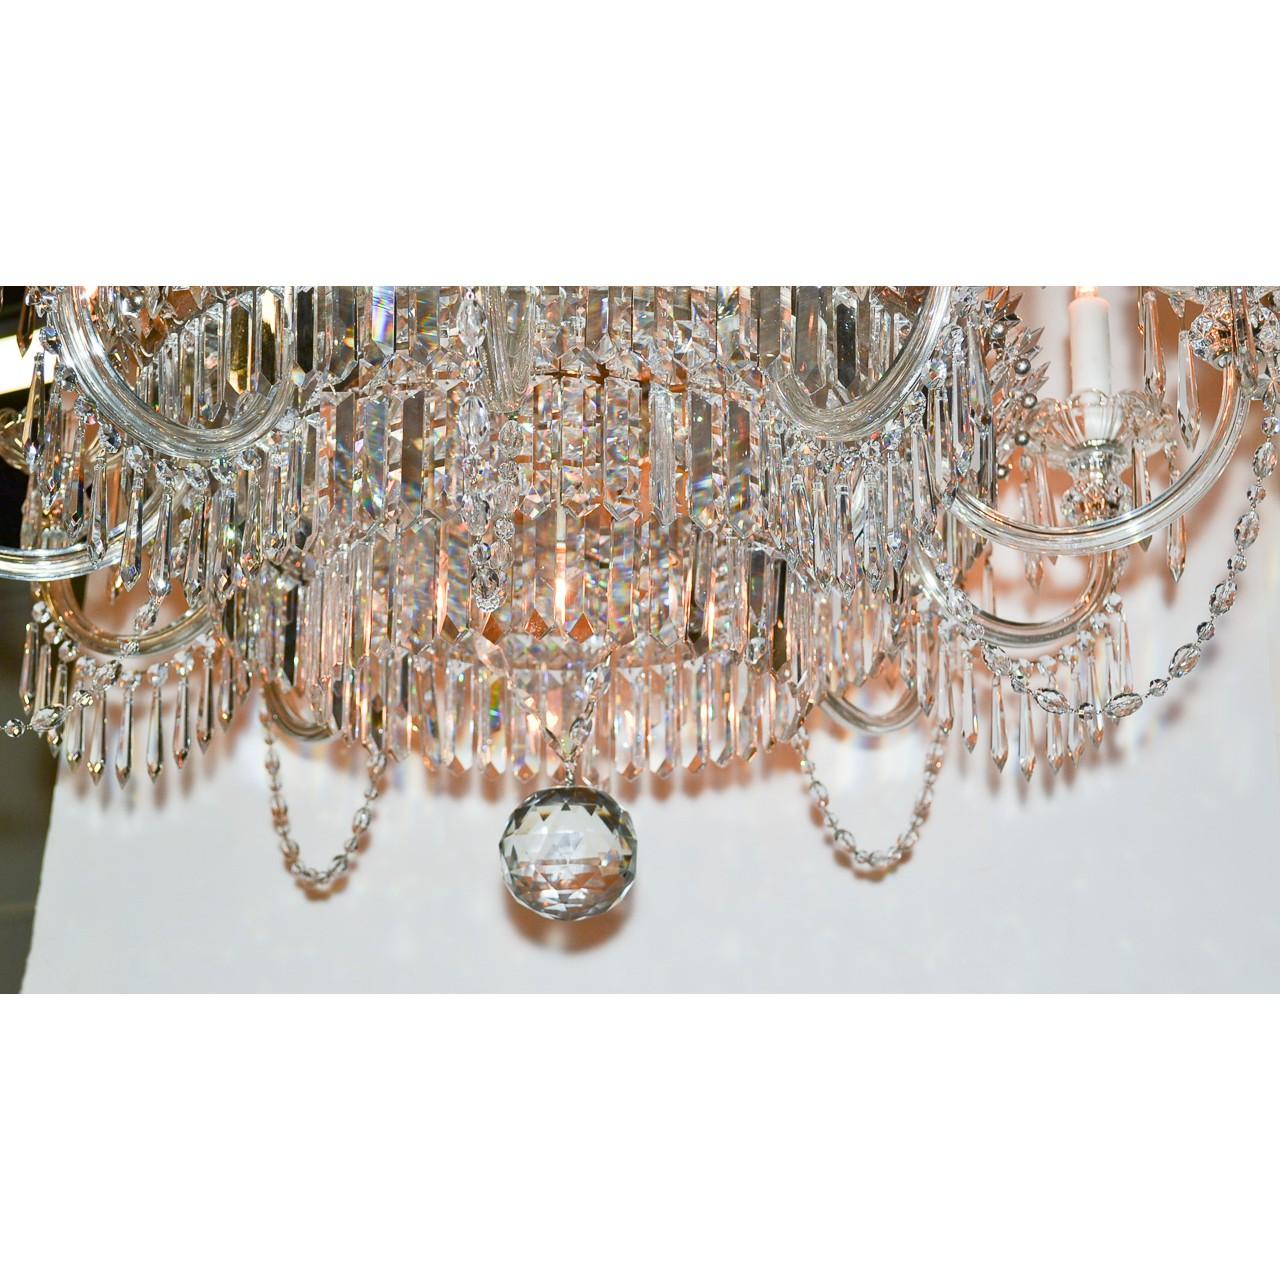 Remarkable continental crystal fifteen-light chandelier with a beautifully draped crown featuring clusters of icicle prisms and starburst crystal accents. The shaped cut crystal stem having an upper tier with candle drop lighting and starburst